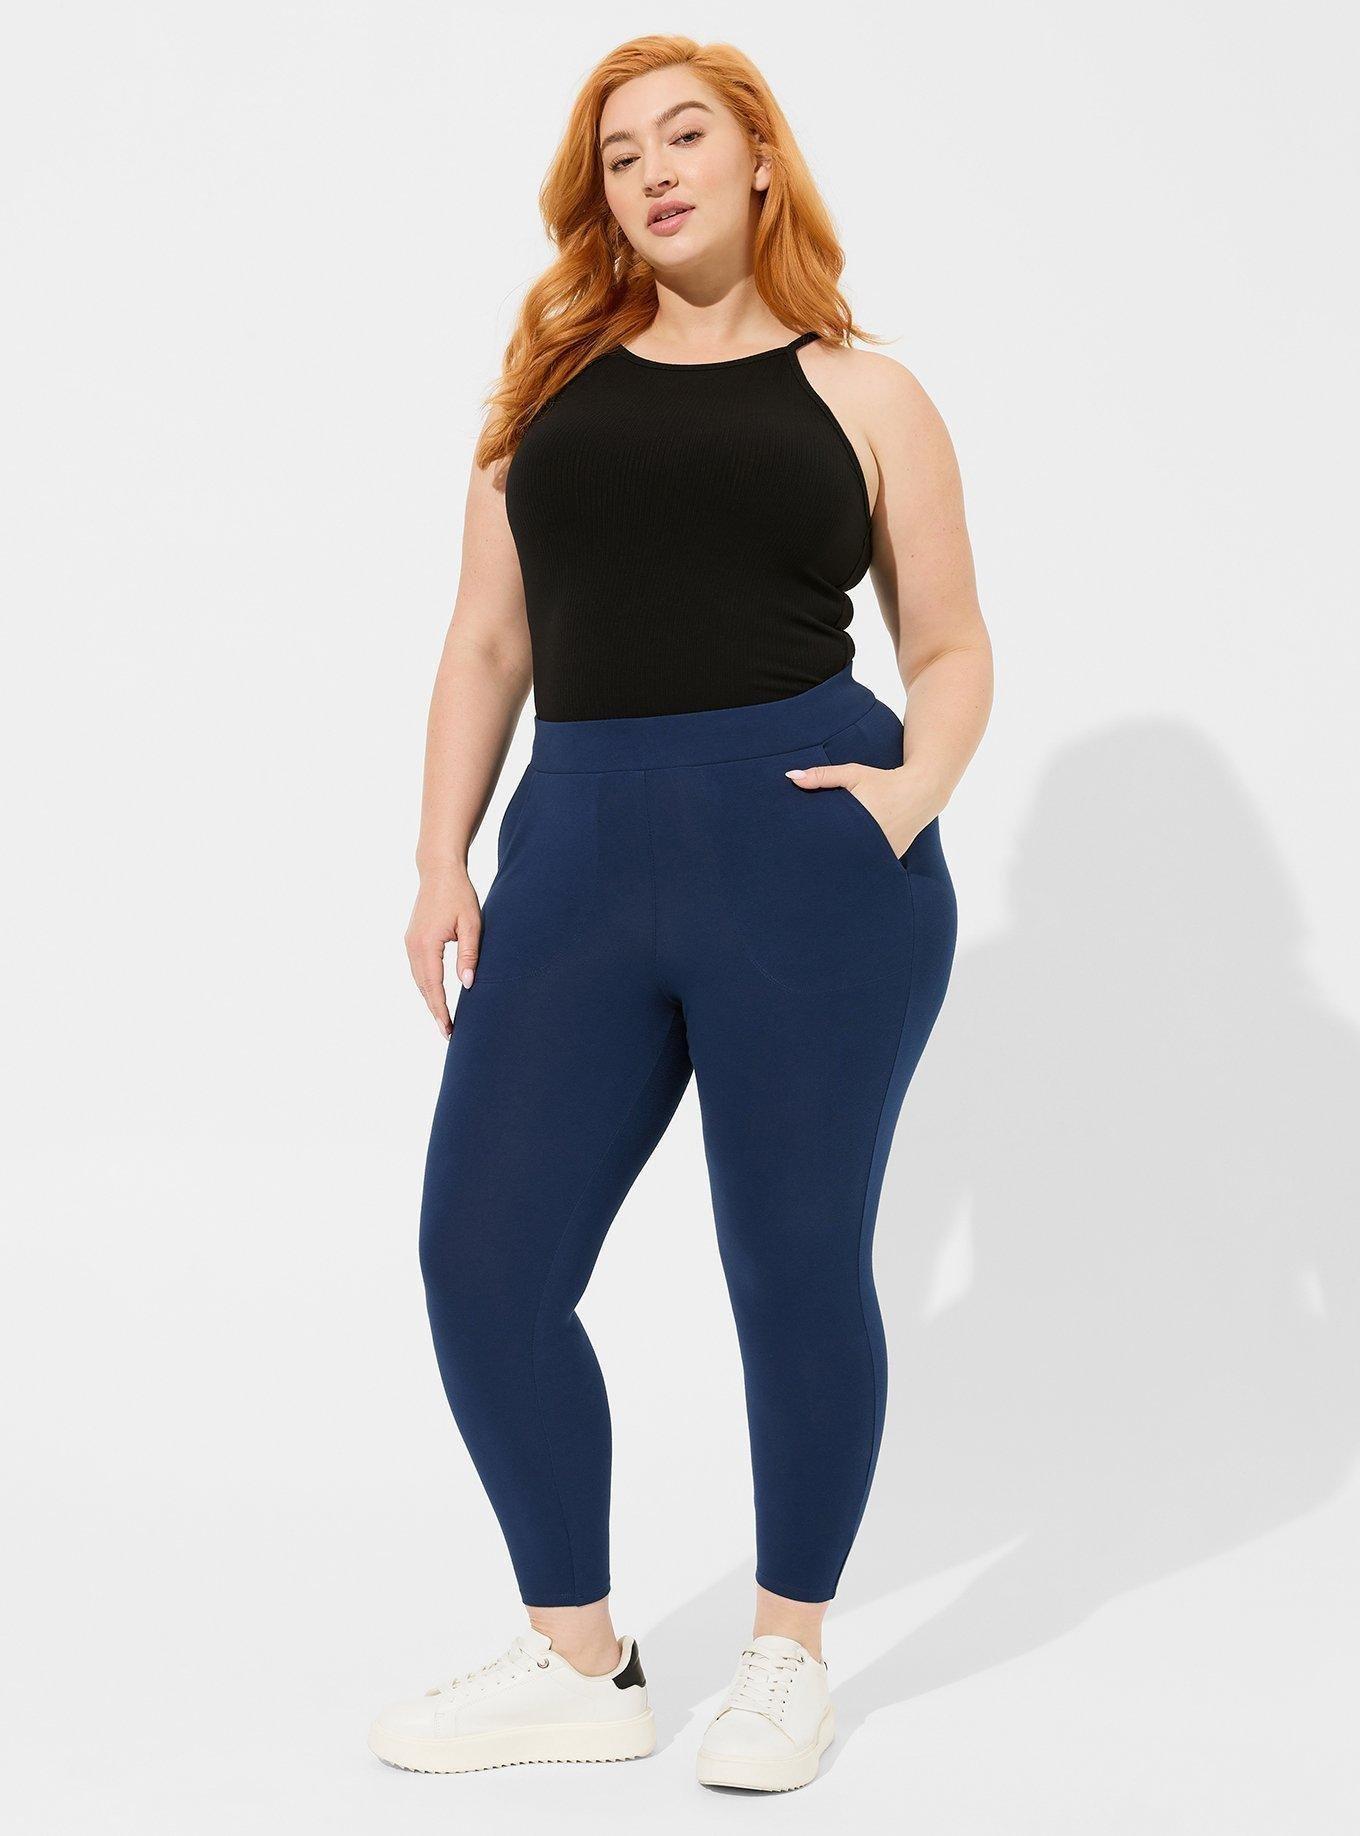 Buttery Smooth Basic Solid Extra Plus Size Leggings - 3X-5X - USA Fashion